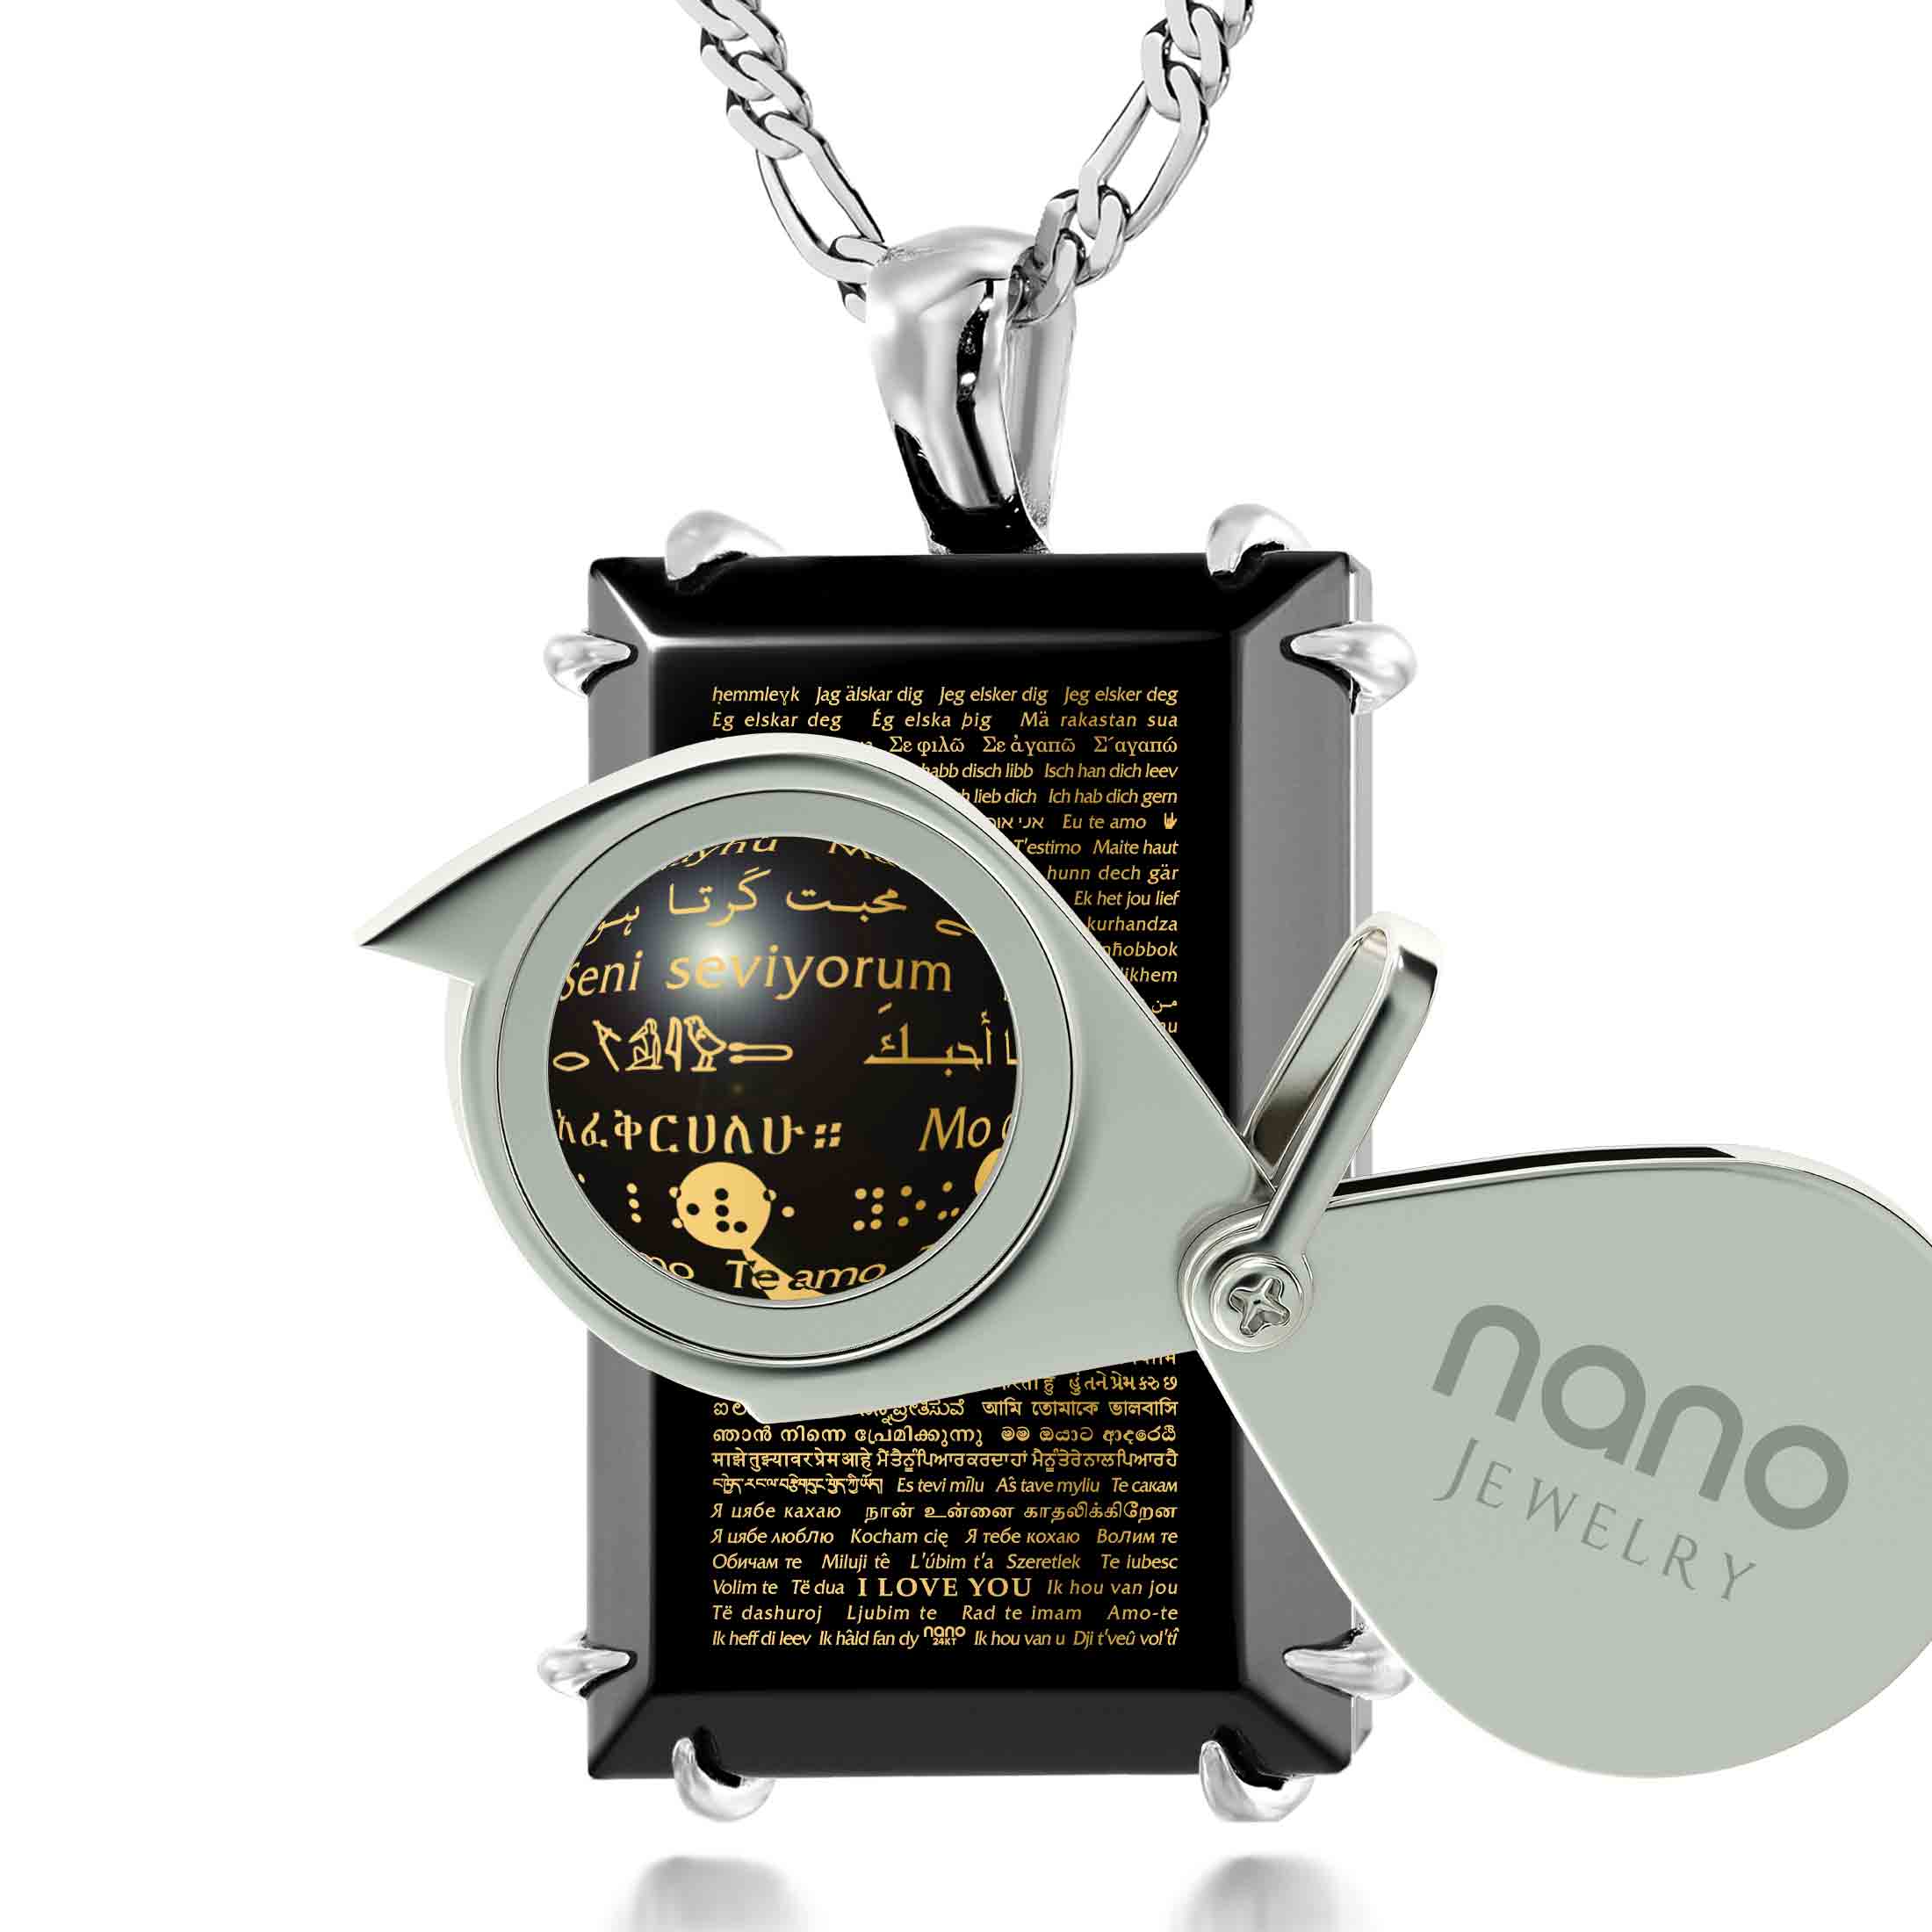 Onyx King Pendant - 'I Love You' in 120 Languages